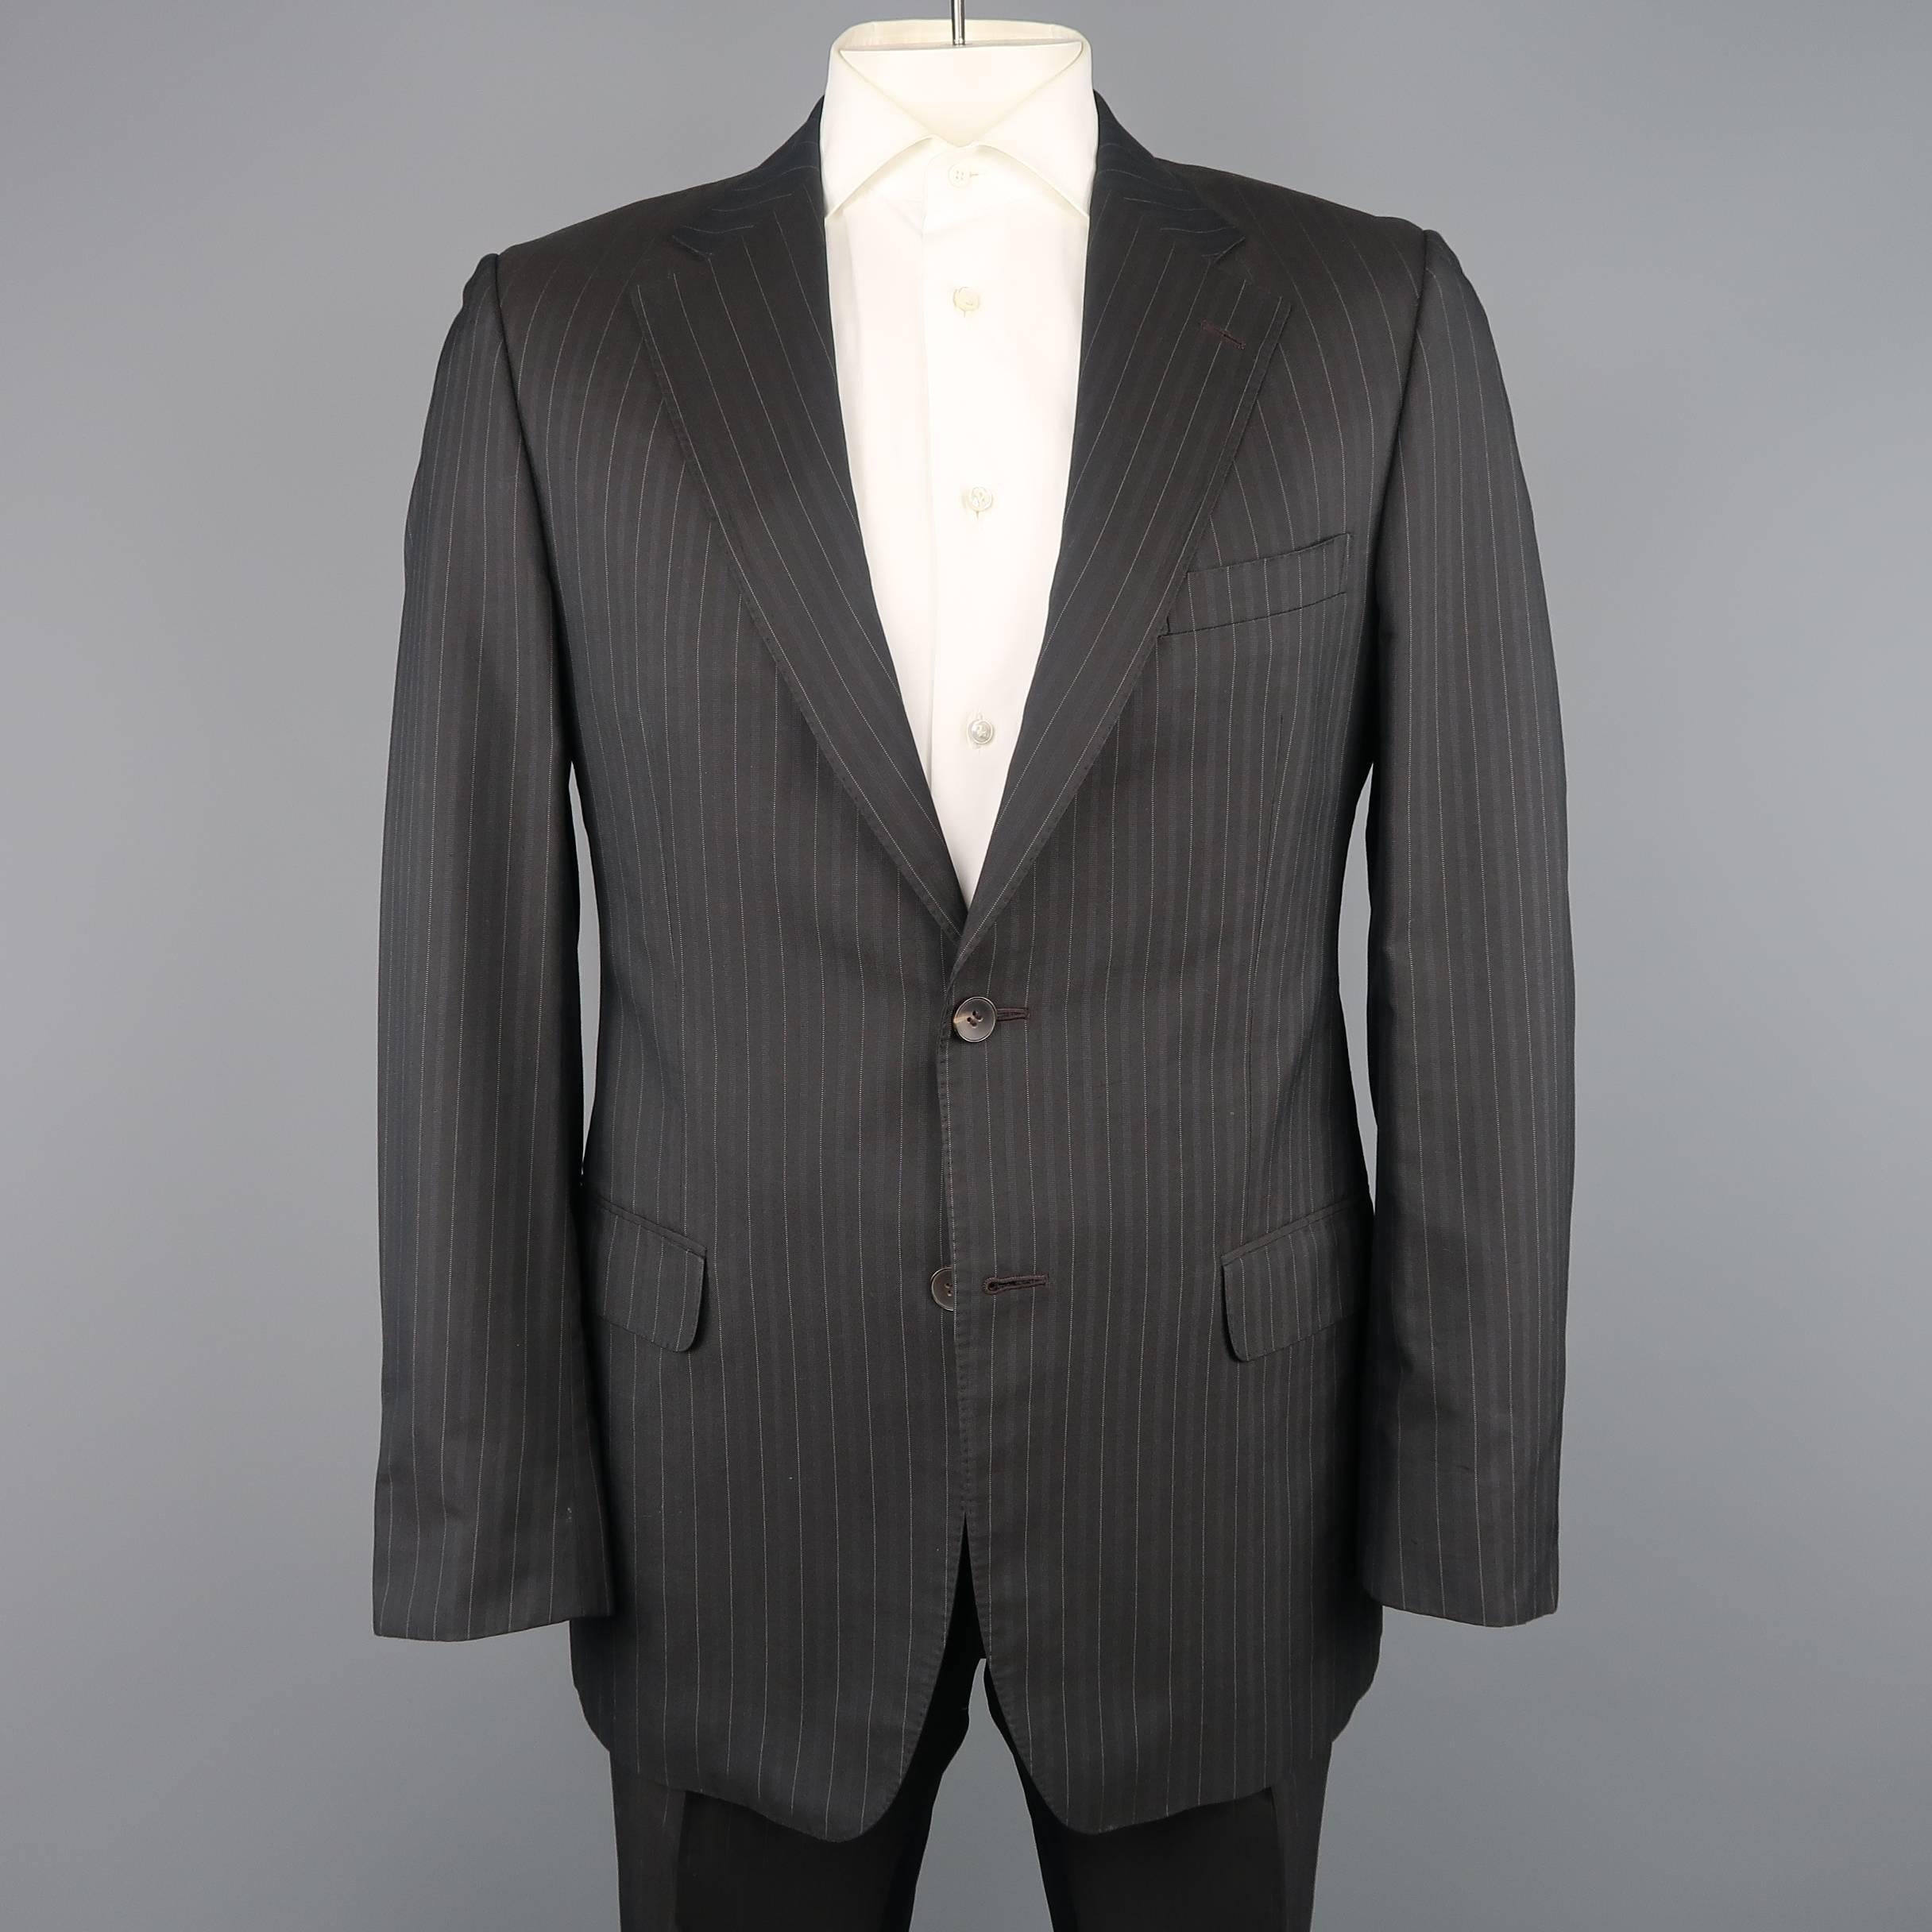 Two piece GUCCI suit comes in charcoal gray pinstripe wool silk blend fabric and includes a single breasted two button sport coat with matching flat front trousers. Minor wear. Made in Switzerland.
 
Good Pre-Owned Condition.
Marked: IT 52
